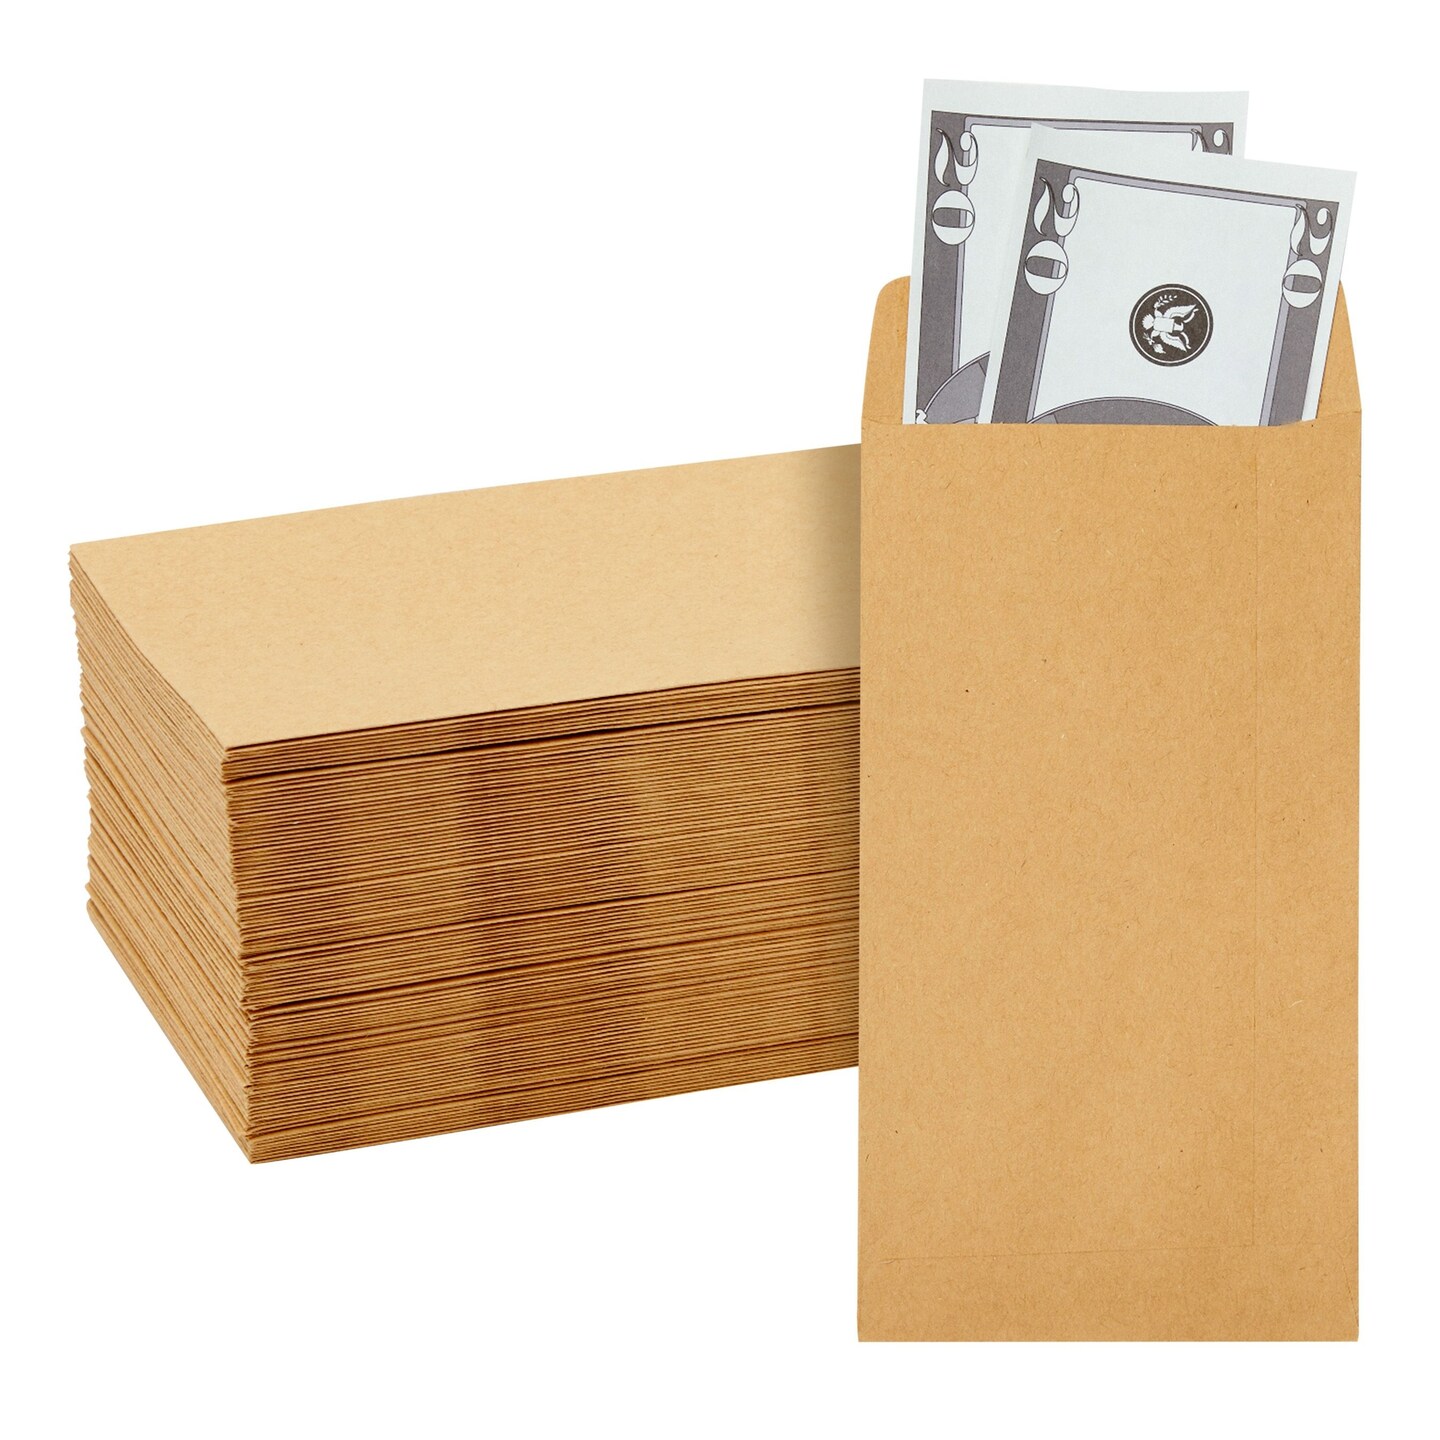 100 Pack Small Kraft Paper Material #7 Money Envelopes for Cash, Coins, Banks, Currency, and Budgeting (3.5 x 6.5 In)